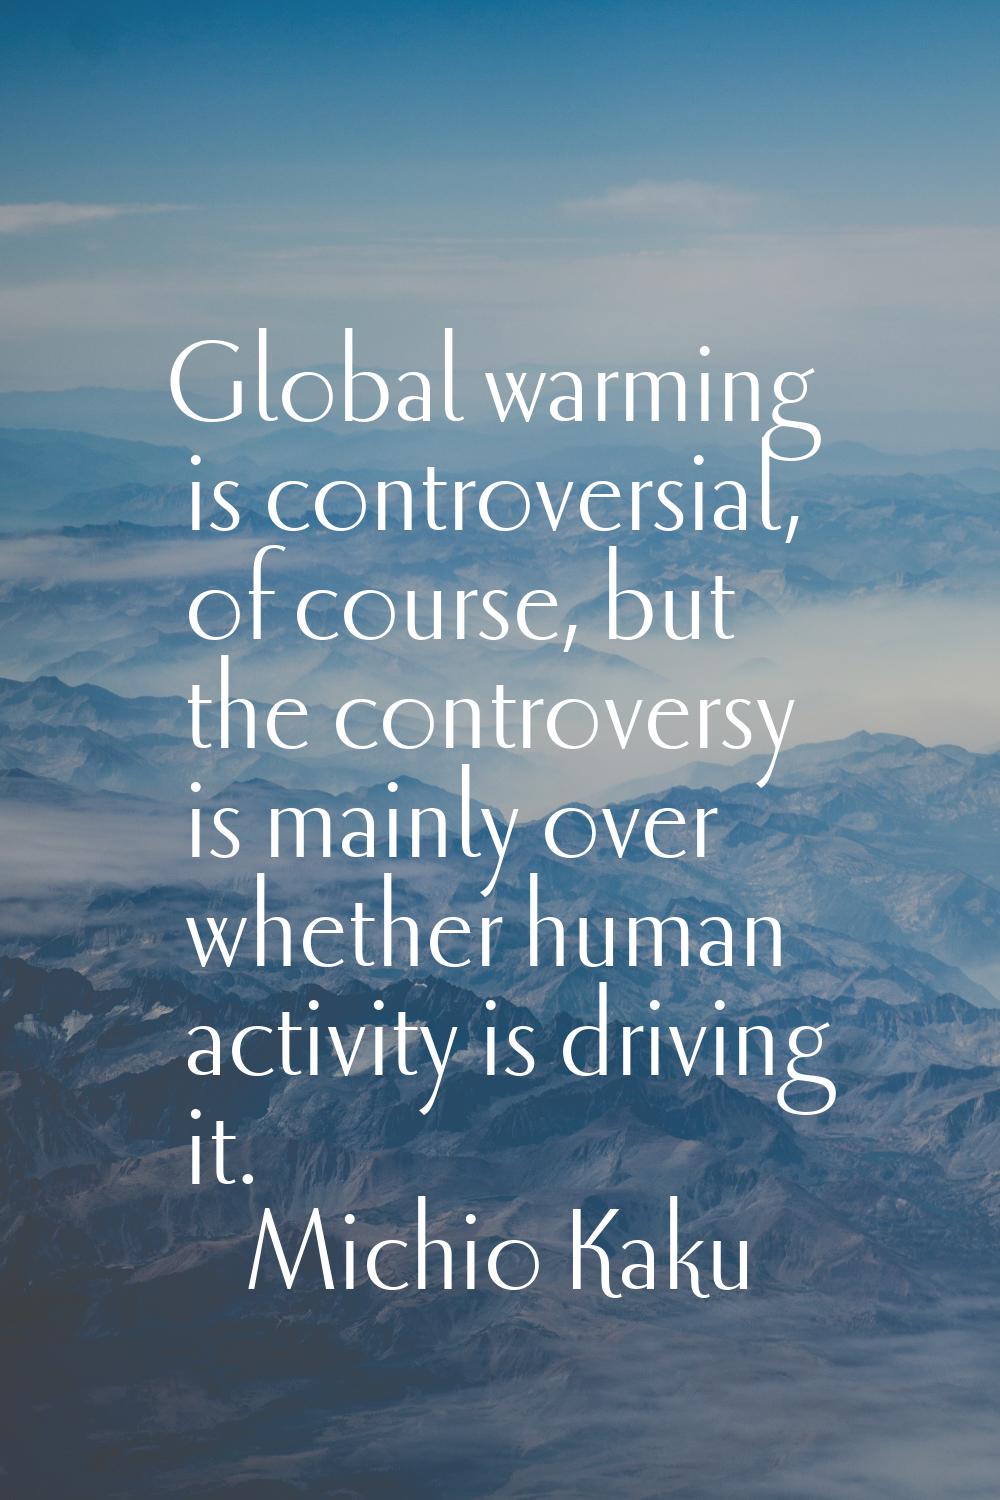 Global warming is controversial, of course, but the controversy is mainly over whether human activi